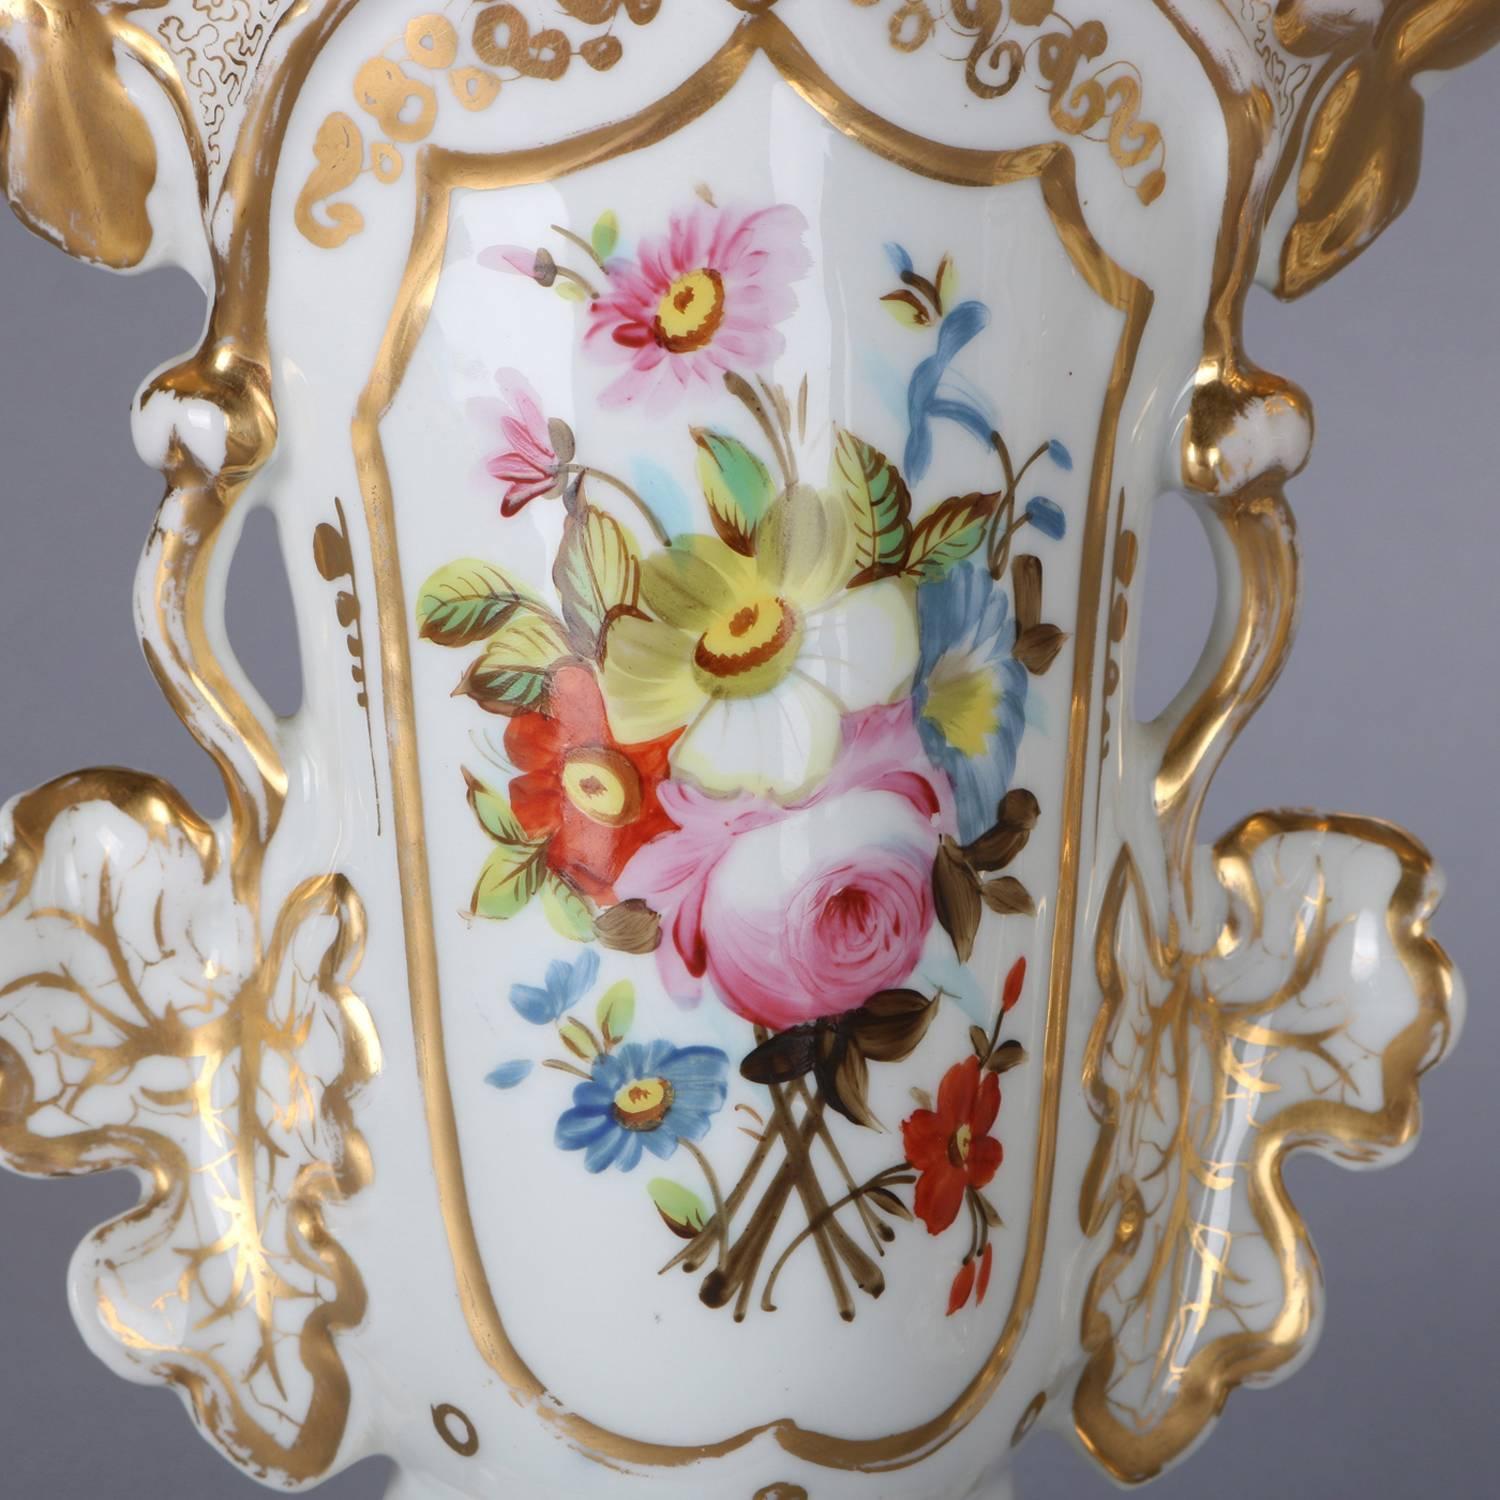 Pair of French Old Paris spill vases feature porcelain construction with shaped and fanned mouth over vessel with hand painted floral reserves with gilt highlights throughout, marked on base, 19th century.

Measures - 9.75